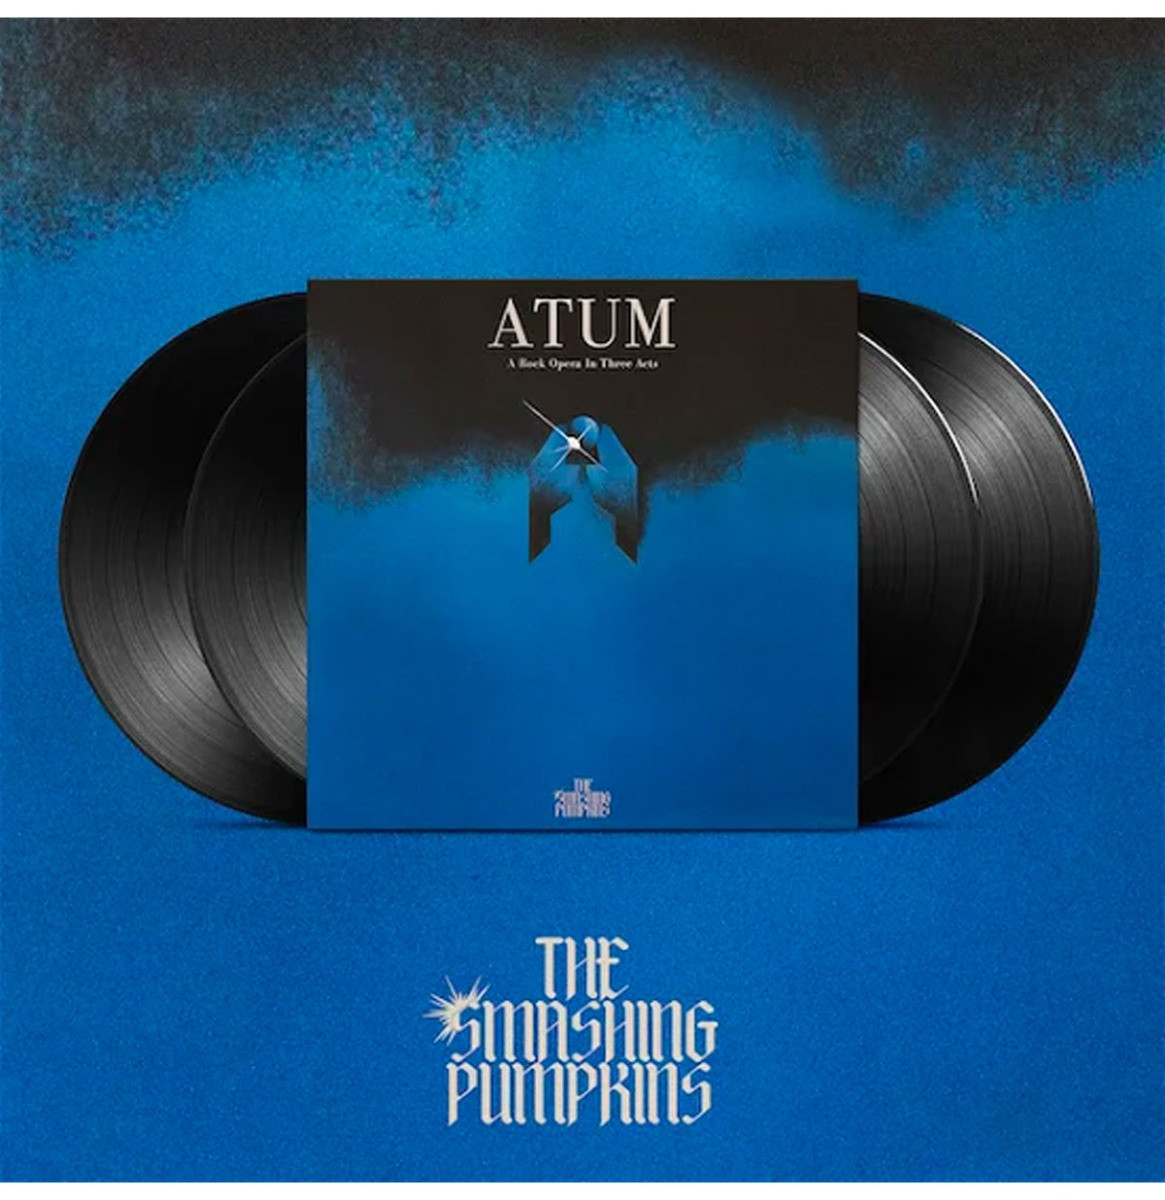 The Smashing Pumpkins - ATUM: A Rock Opera In Three Acts 4LP